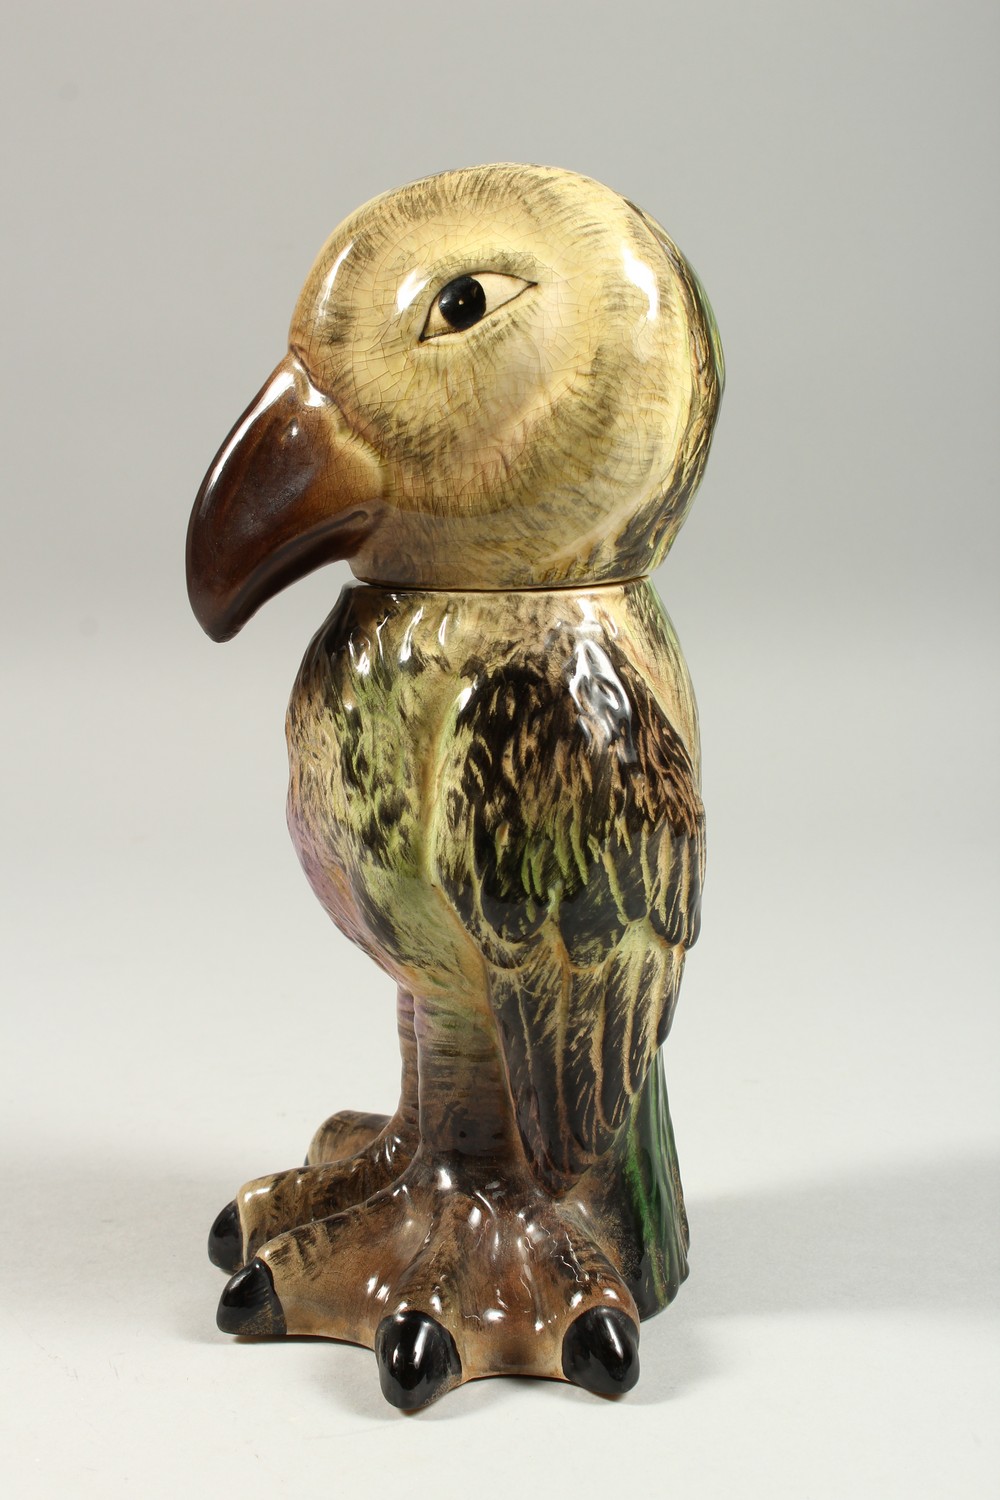 A MARTIN WARE STYLE "WALLY BIRD" JAR AND COVER. 9.5ins high. - Image 4 of 9